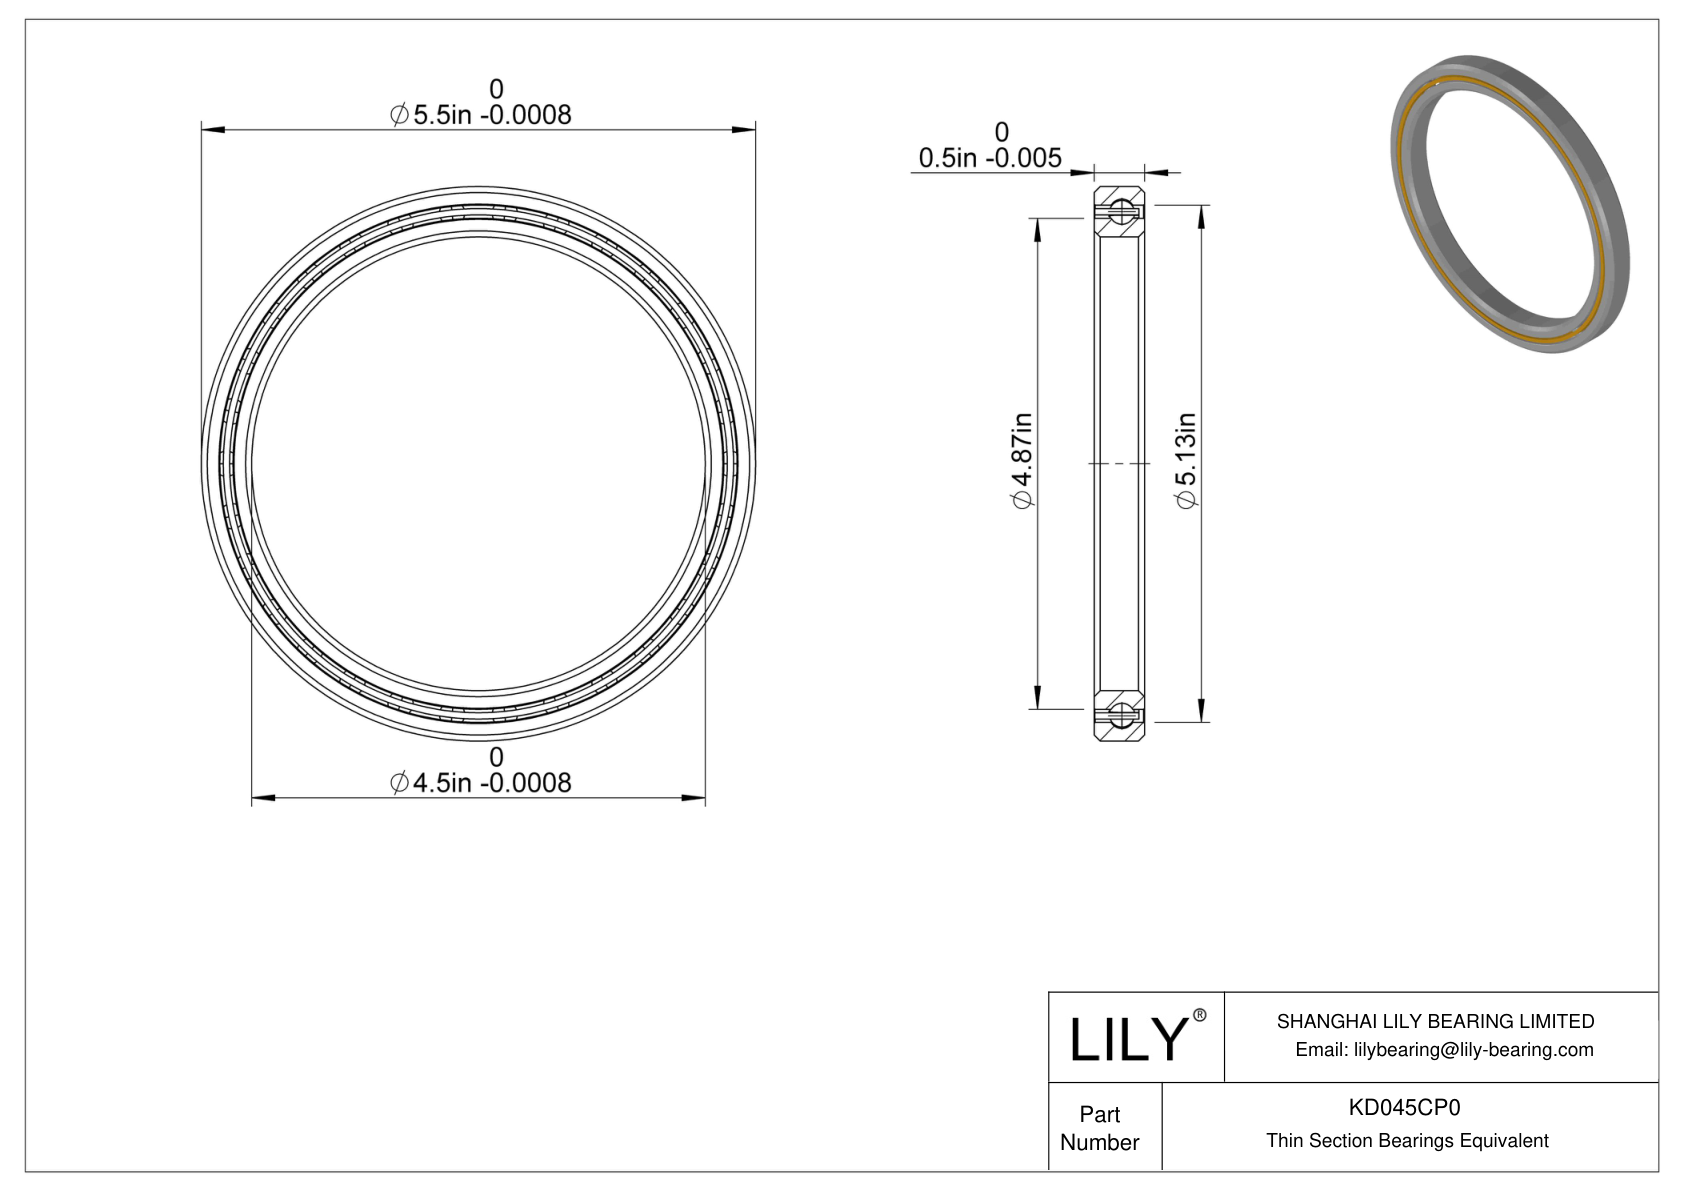 KD045CP0 Constant Section (CS) Bearings cad drawing